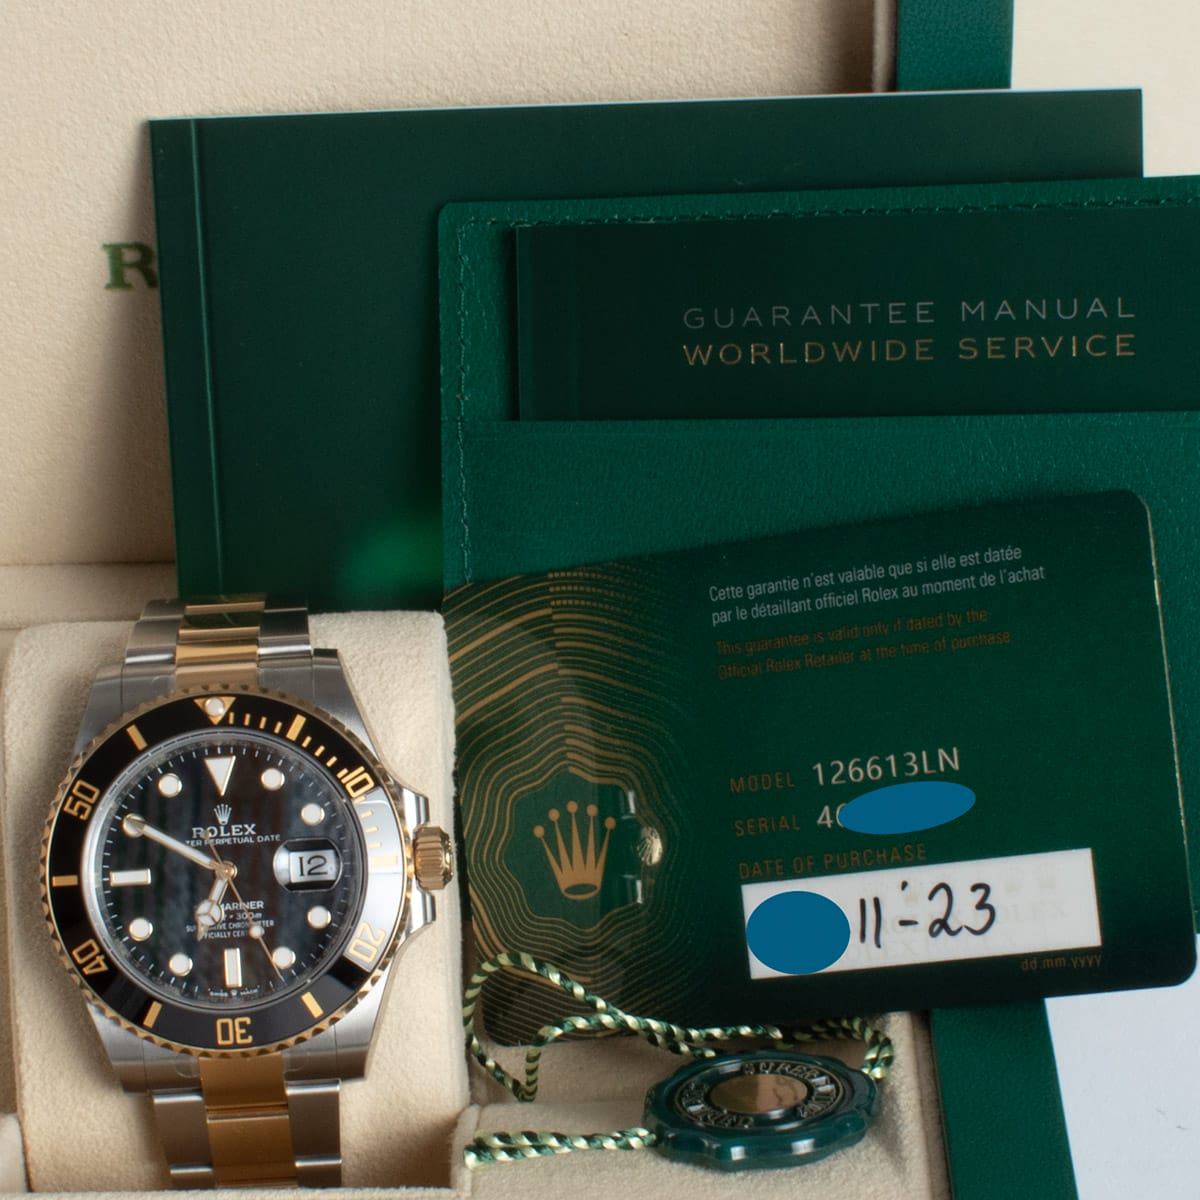 View in Box of Submariner Date 41